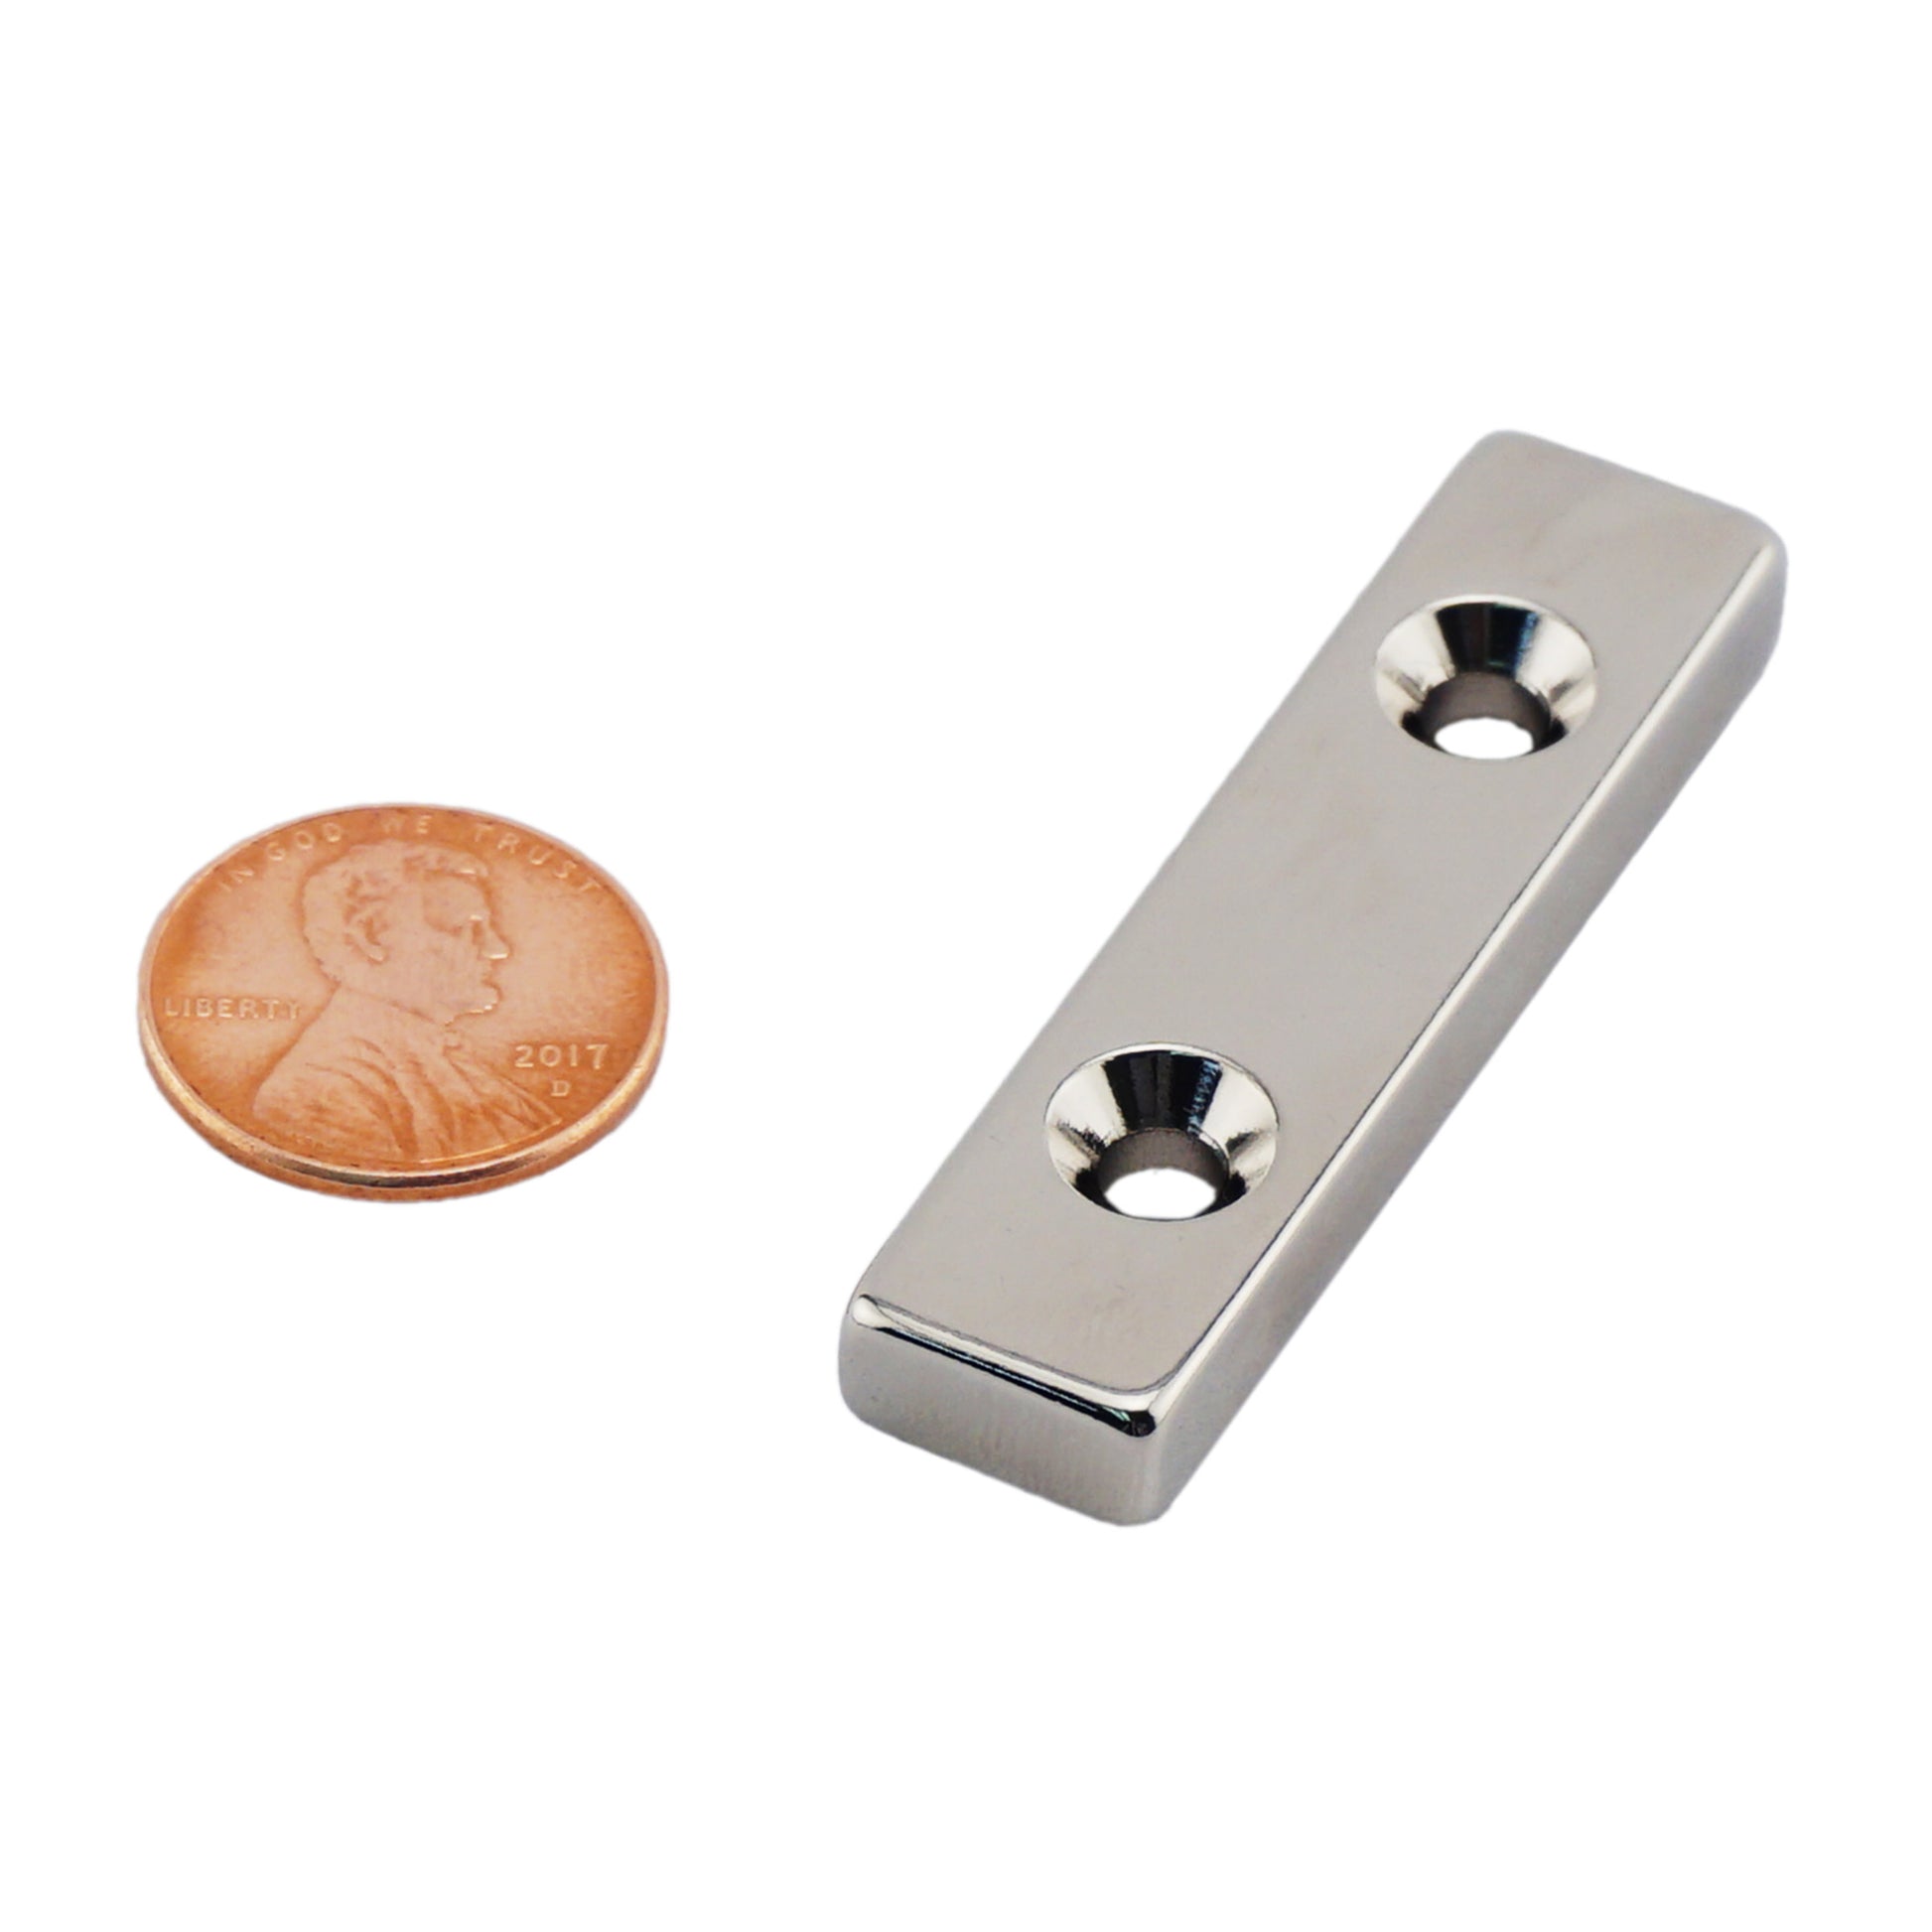 Load image into Gallery viewer, NB002555NCTSX2 Neodymium Countersunk Block Magnet - Compared to Penny for Size Reference